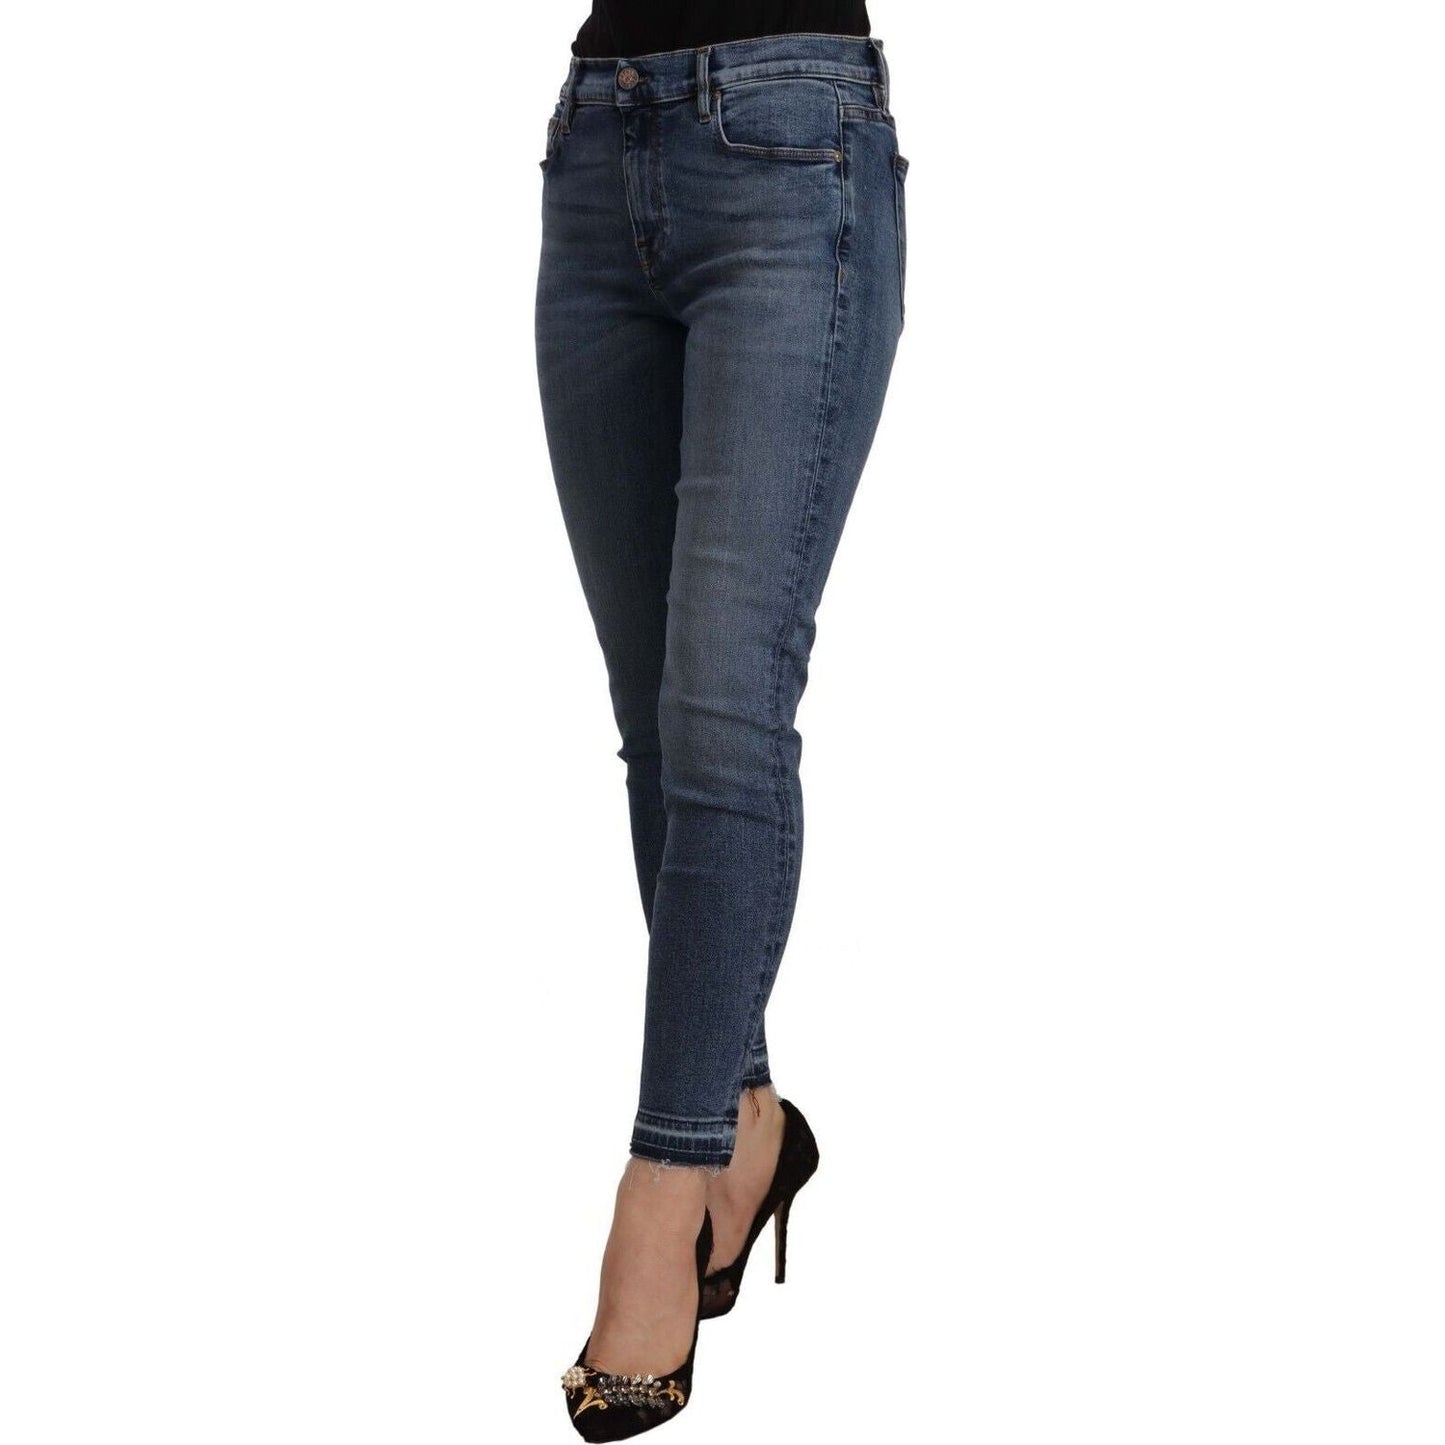 Don The Fuller Chic Slim Fit Blue Washed Jeans blue-mid-waist-cotton-denim-slim-fit-cropped-jeans s-l1600-10-4-31e043ac-5ad.jpg